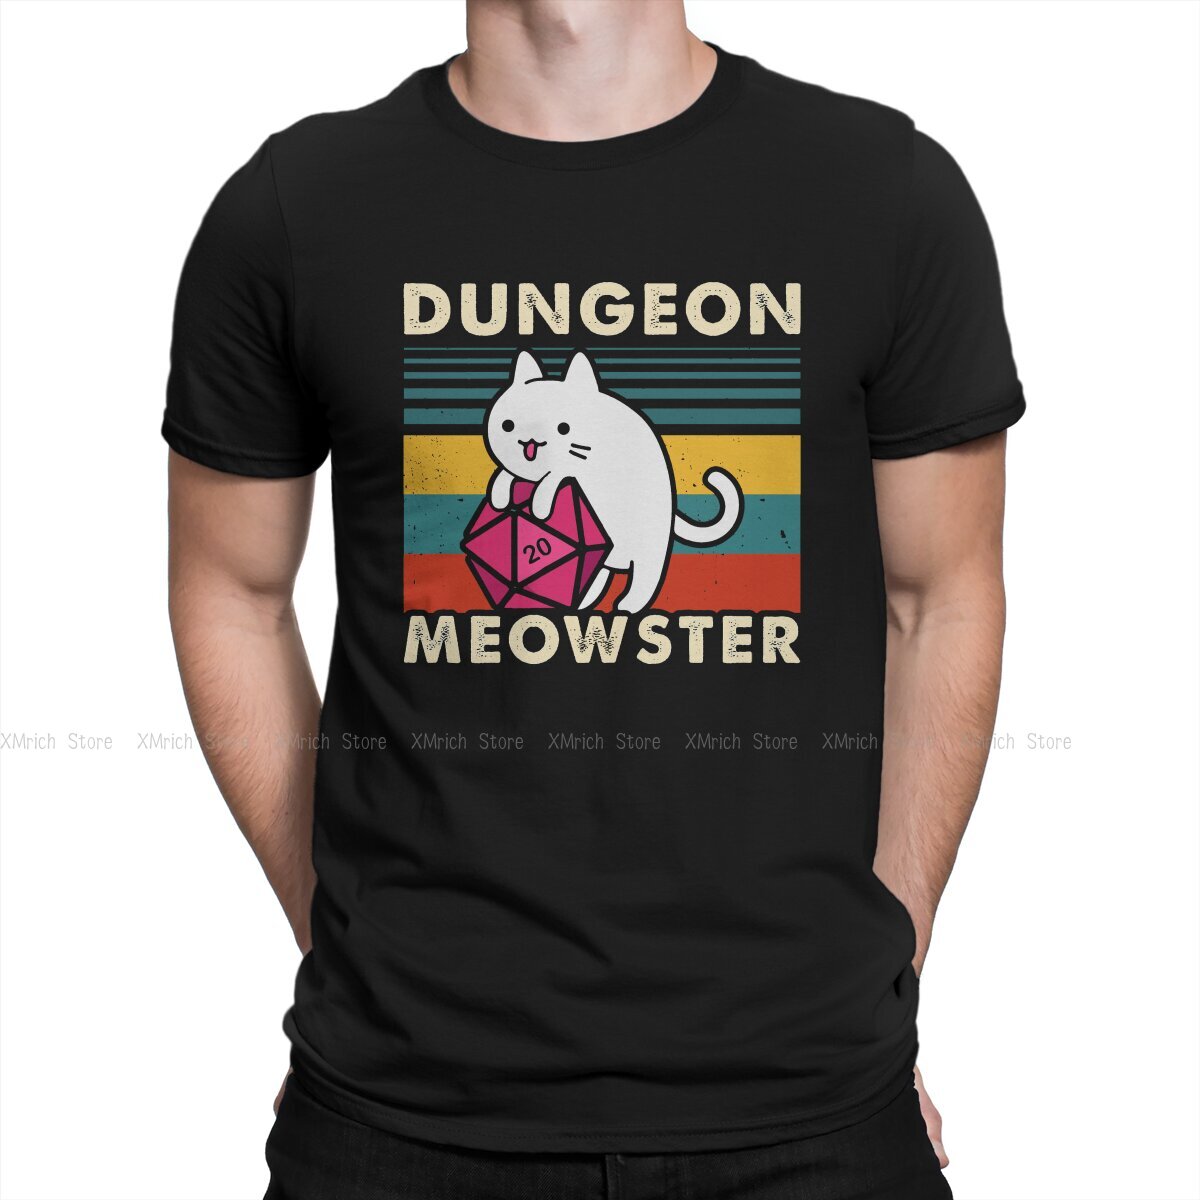 Men's Large T-shirt
 Dungeon Meowster Funny Tabletop Gamer Cat D20 Men'S T Shirts Dnd Game Awesome Tees O Neck T-Shirt Cotton Gift Idea Clothes